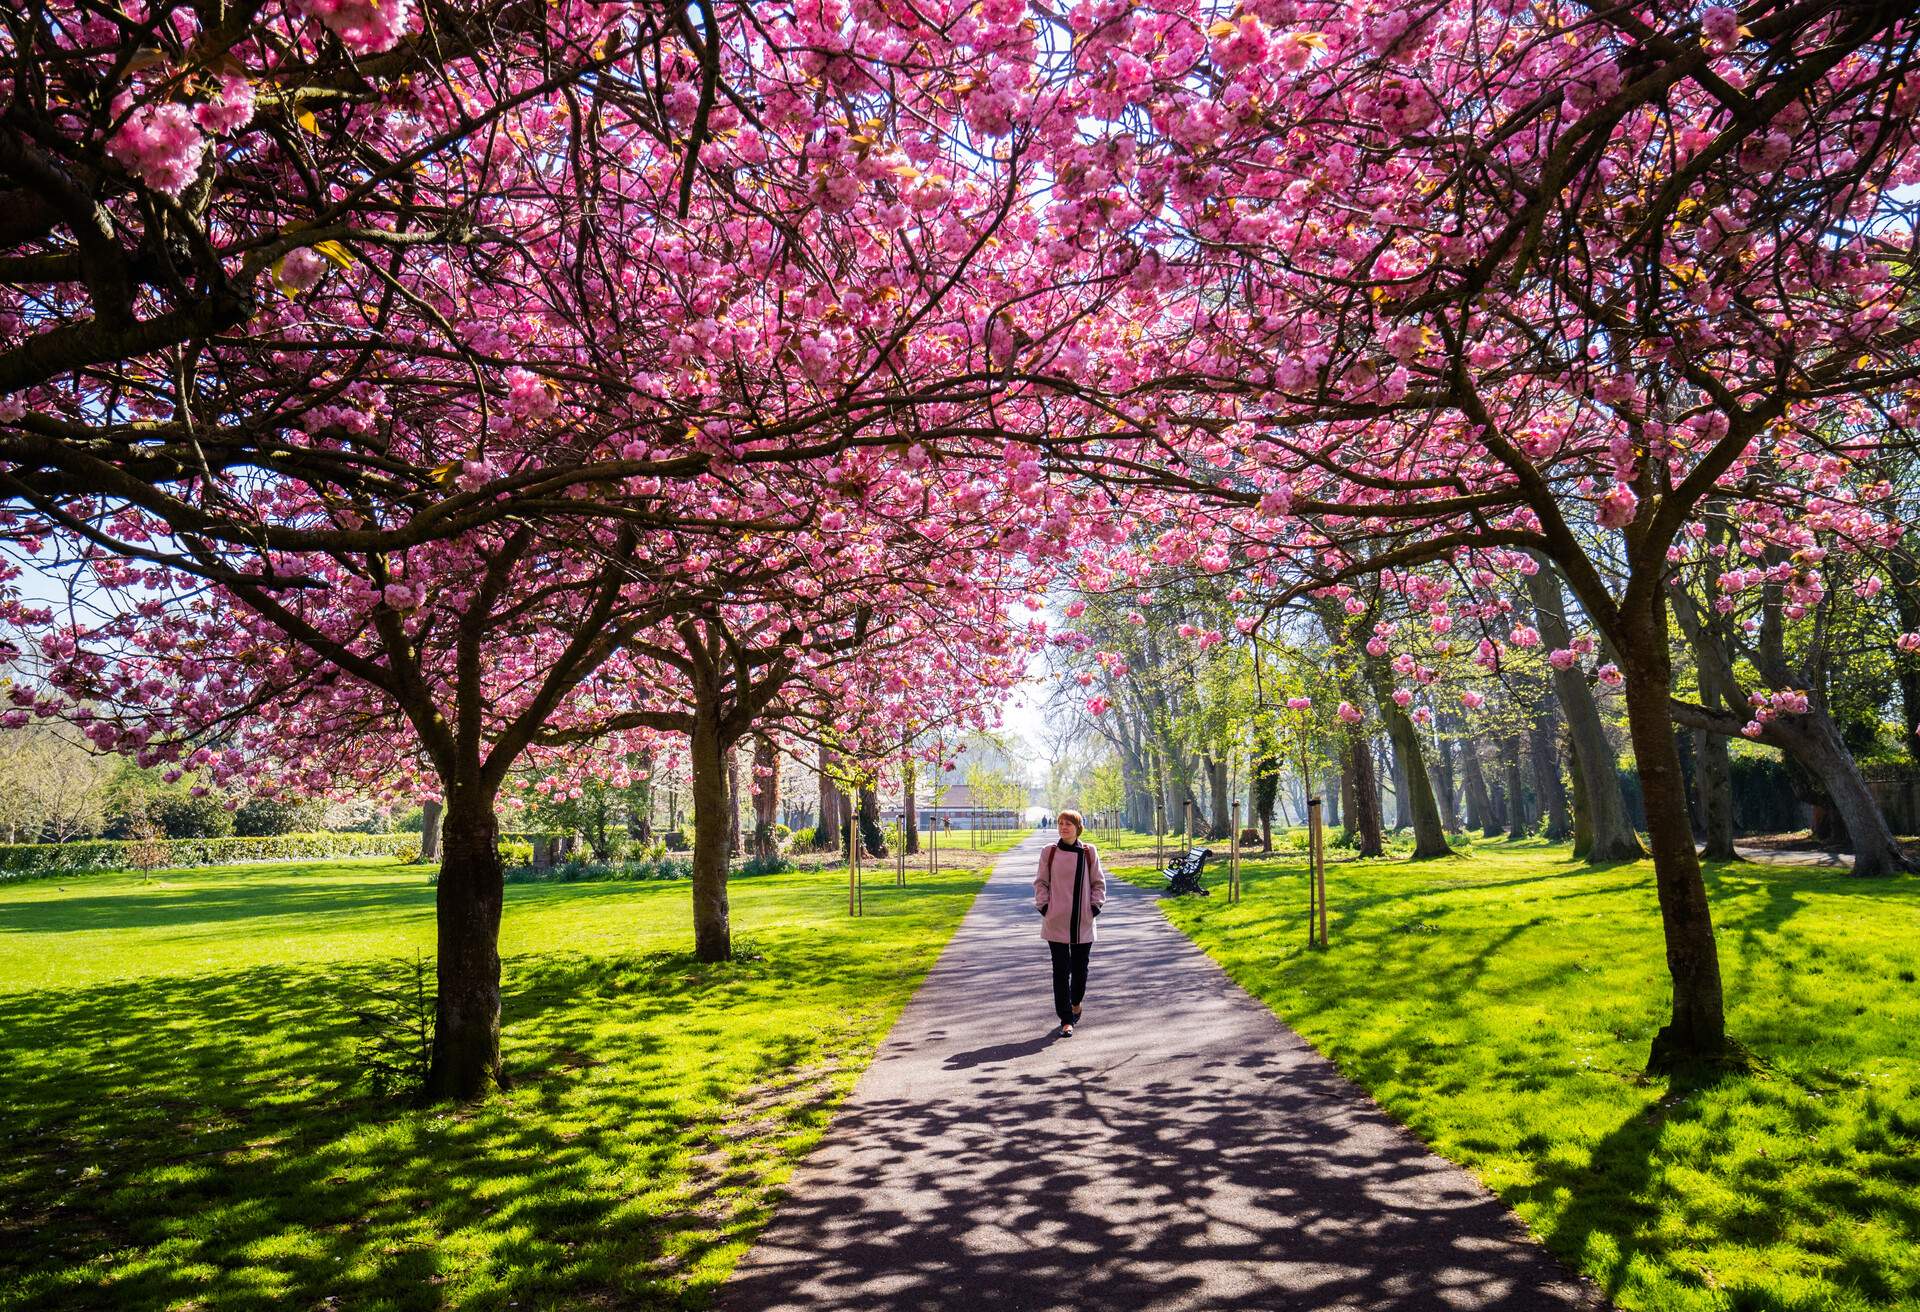 A young woman walking underneath the Cherry Blossom trees in Herbert Park in Dublin, Ireland